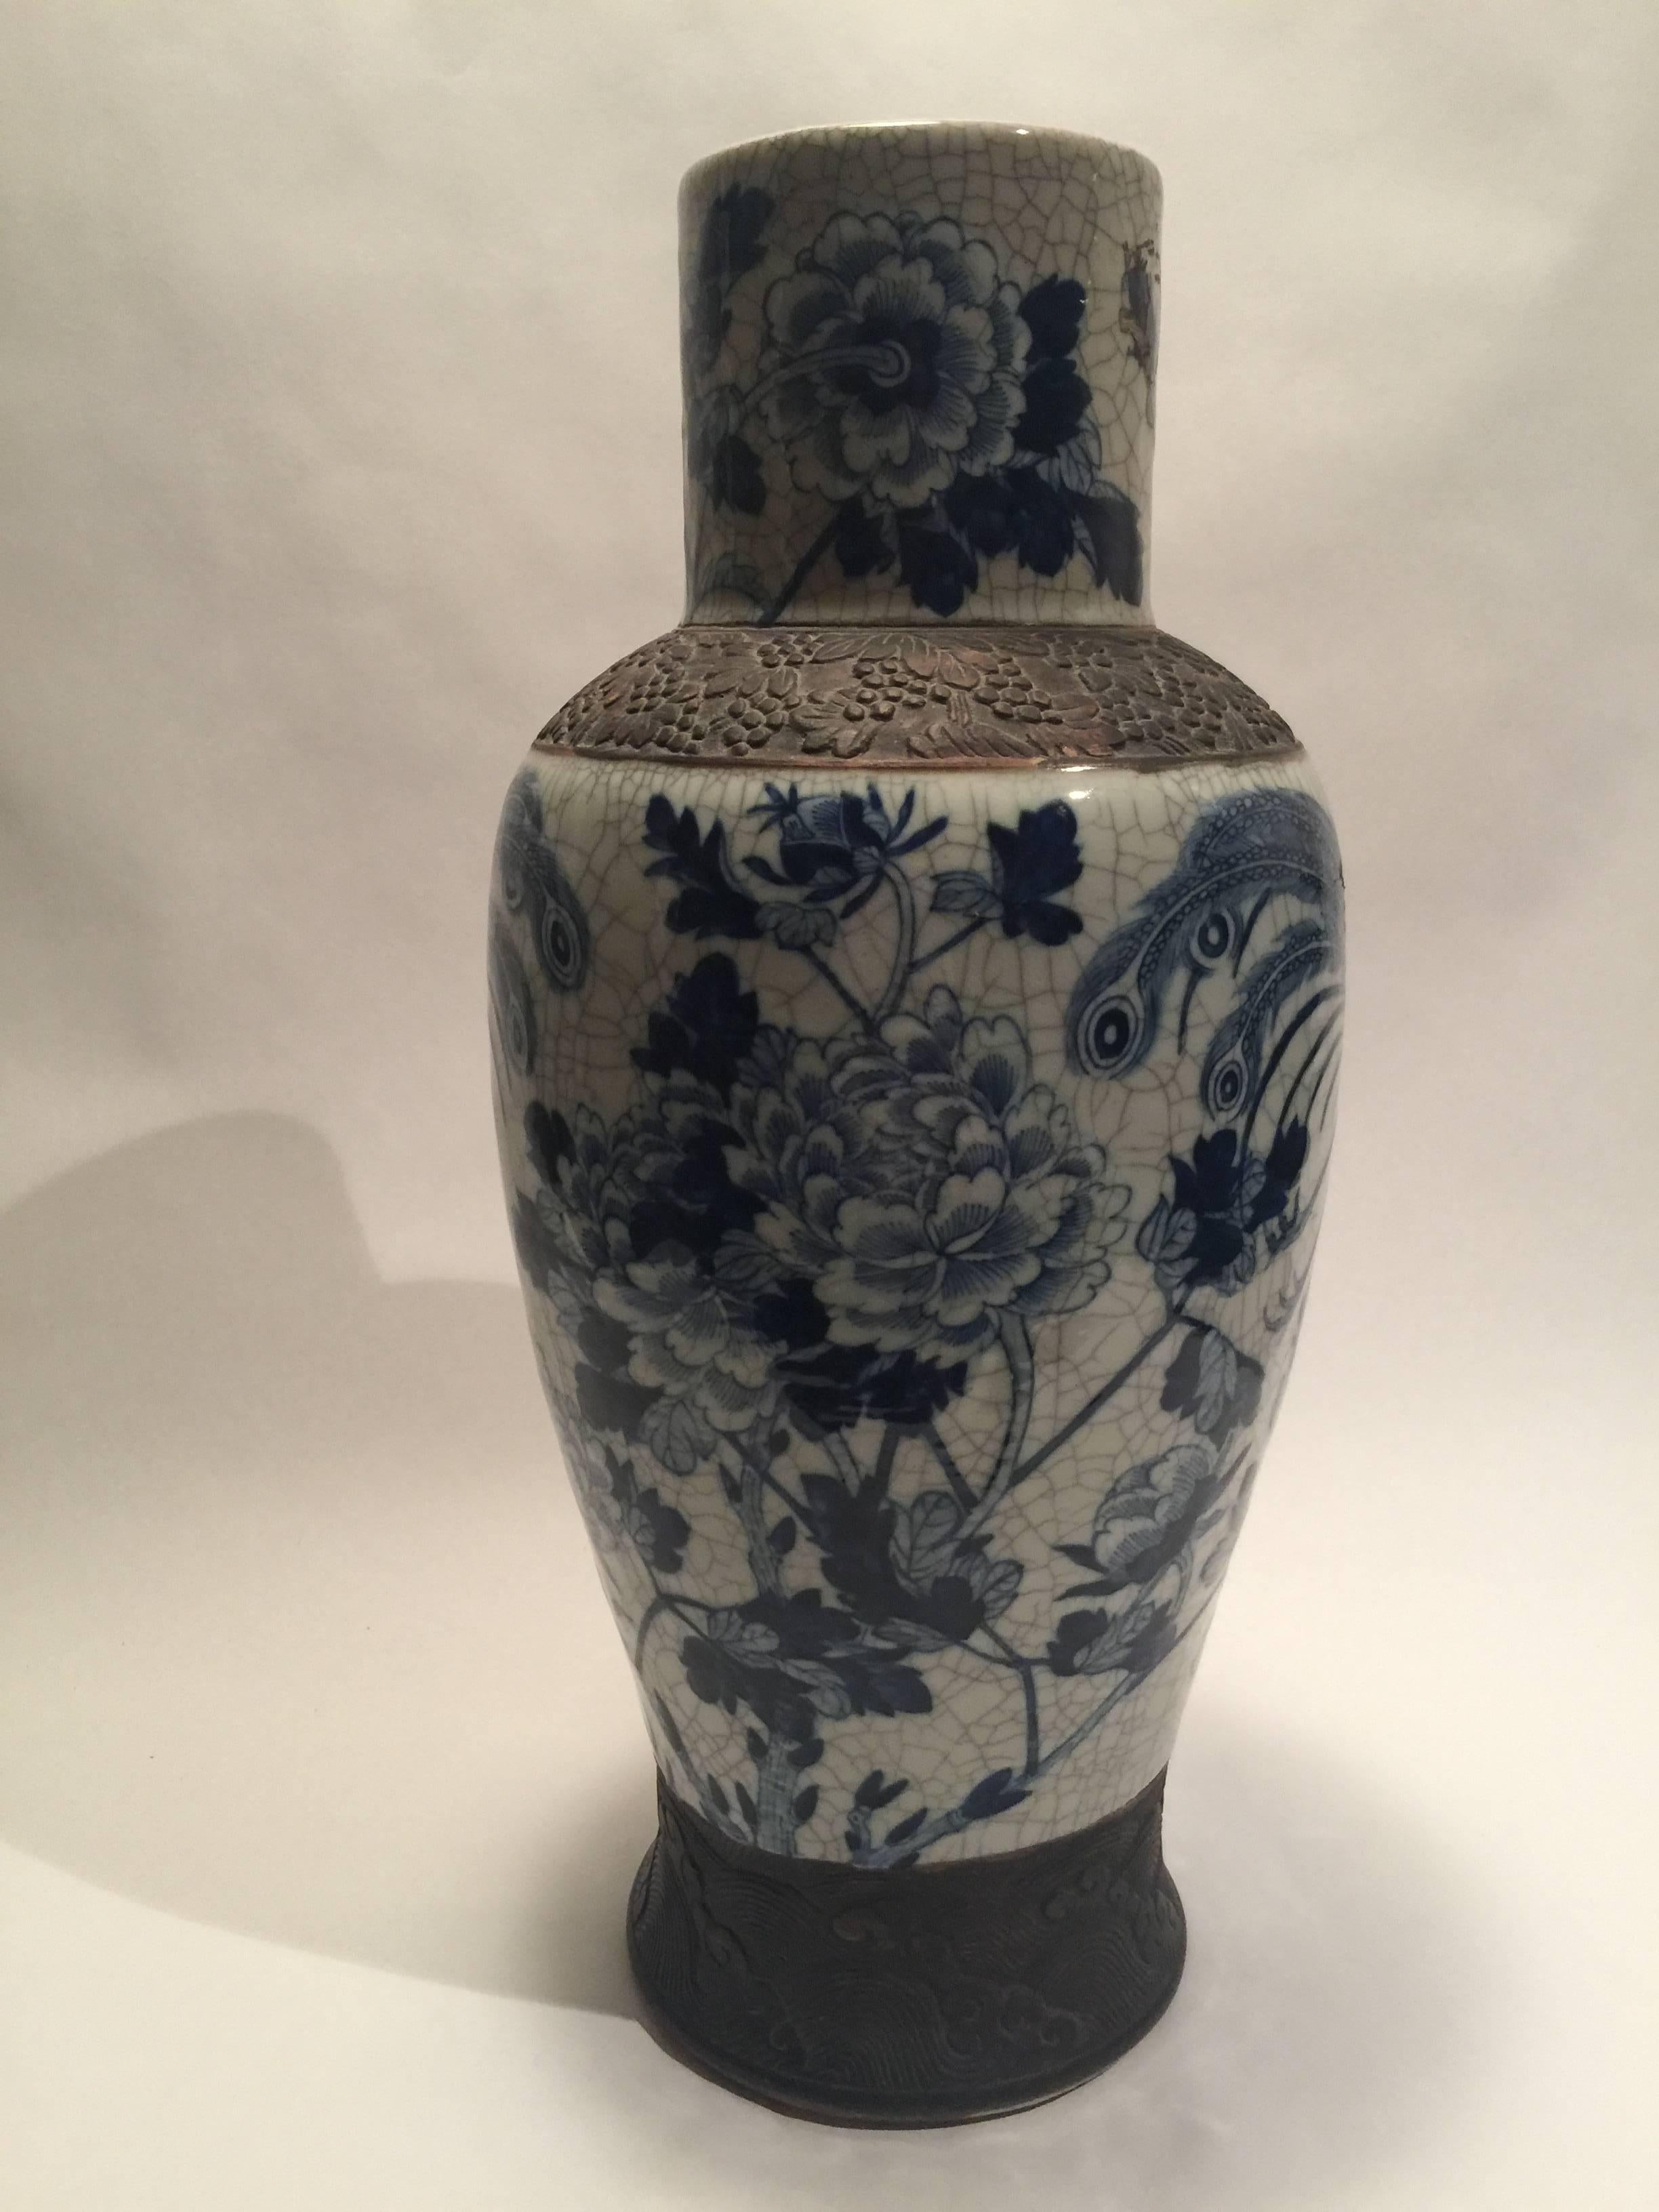 A large vase of porcelain decorated with two beautiful Phoenix birds and peonies. Two iron oxide bands circle the piece. The Tongzhi chop on the bottom is undecipherable due to the fact that it has been drilled through -most likely to create a lamp.